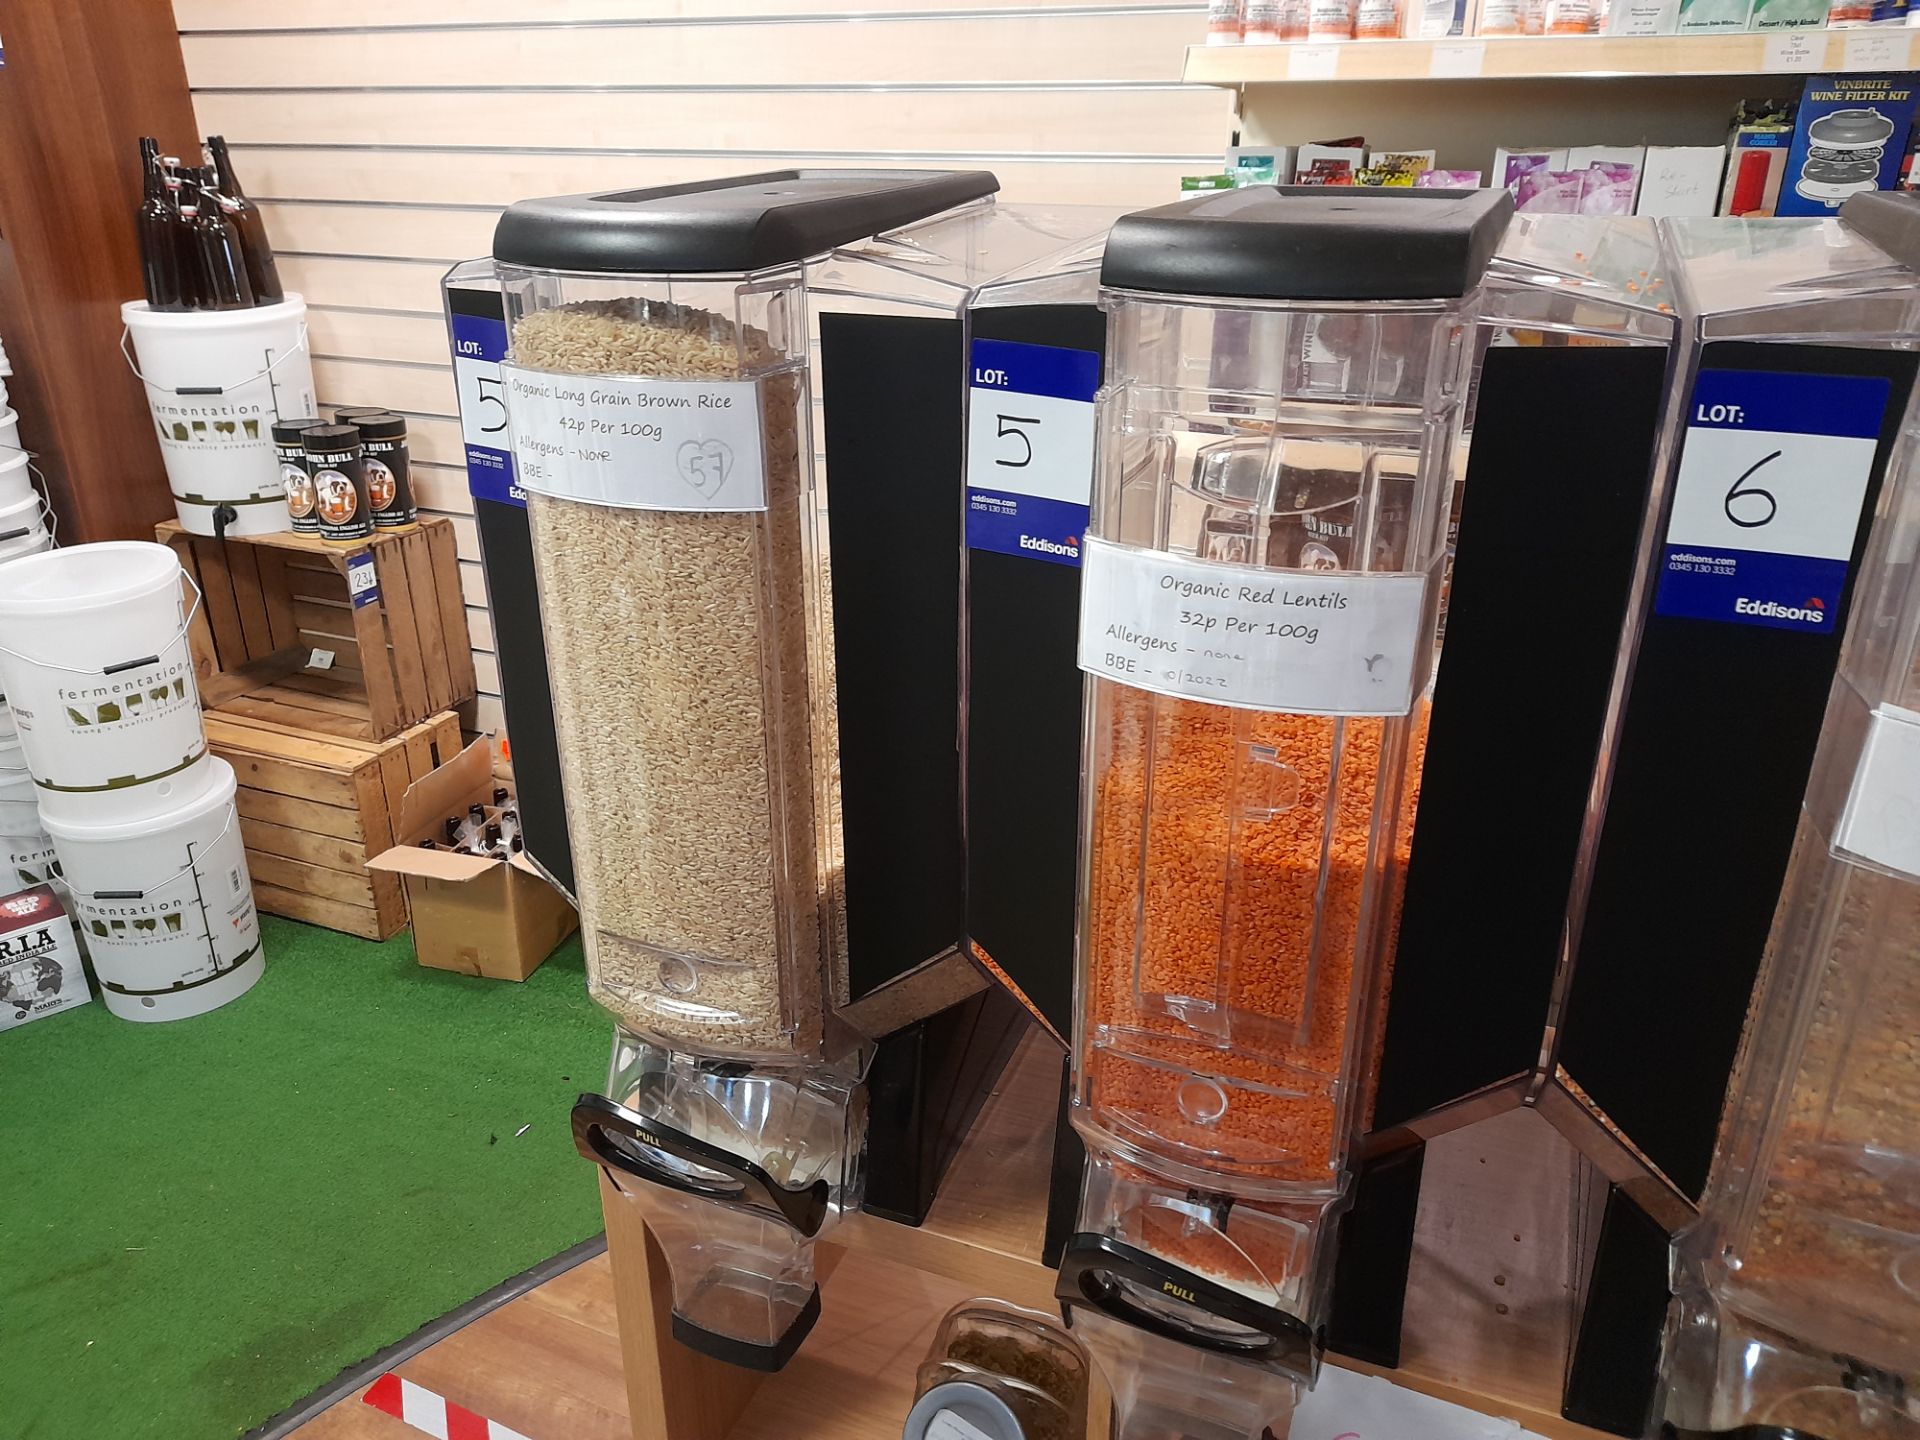 3 Plastic Ingredients Dispensers and Contents including Organic Long Grain Brown Rice, Organic Red - Image 3 of 5